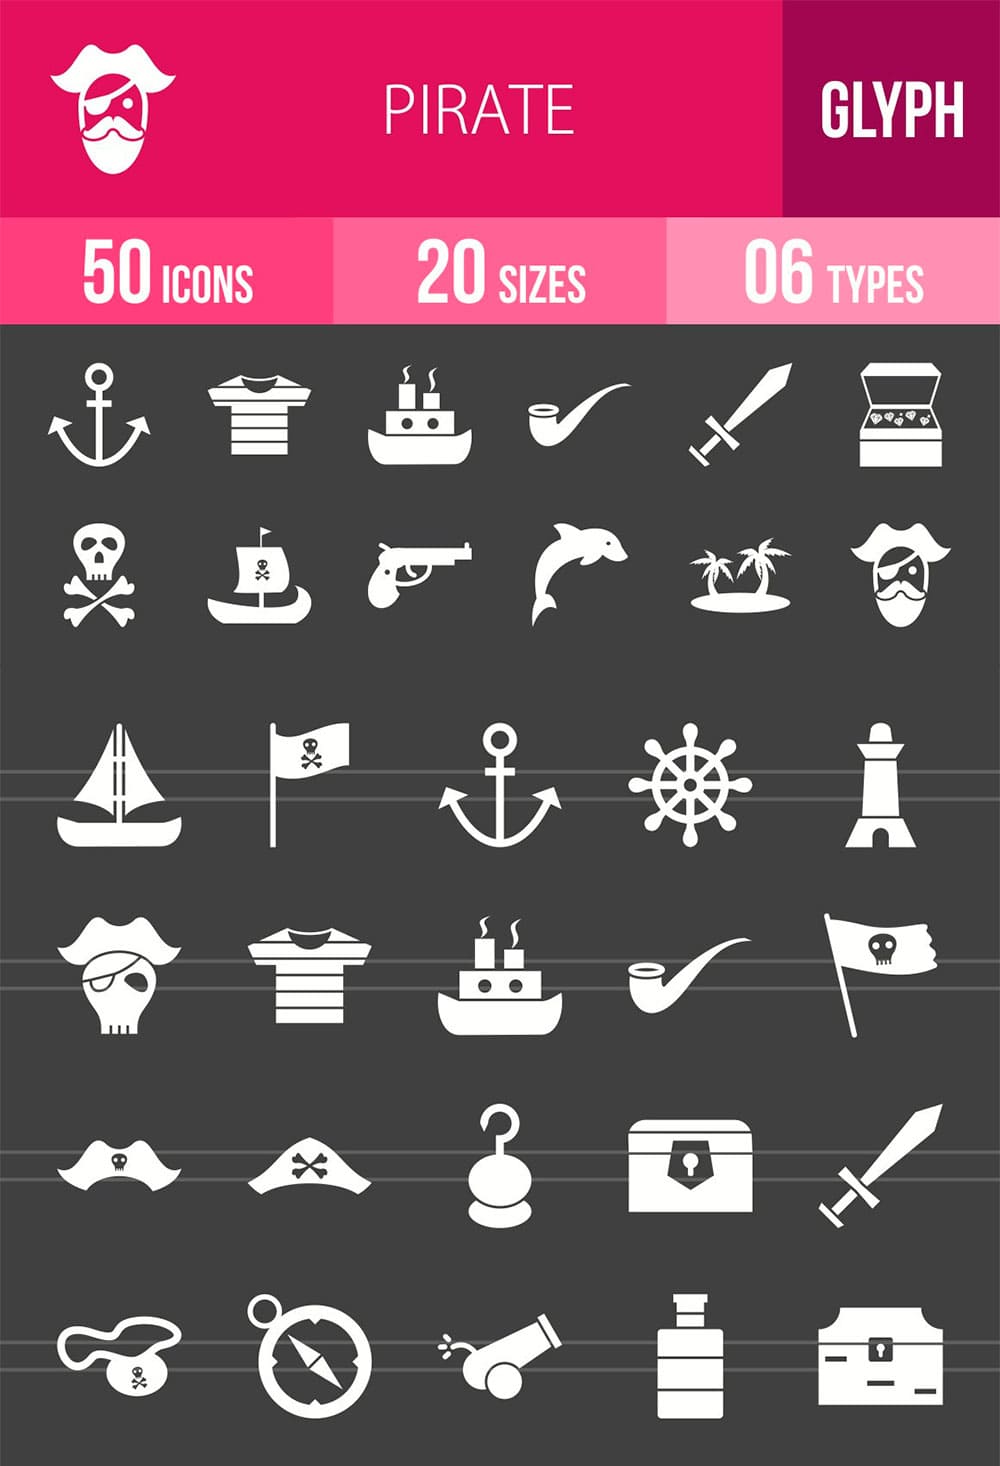 50 pirate glyph inverted icons, picture for pinterest.